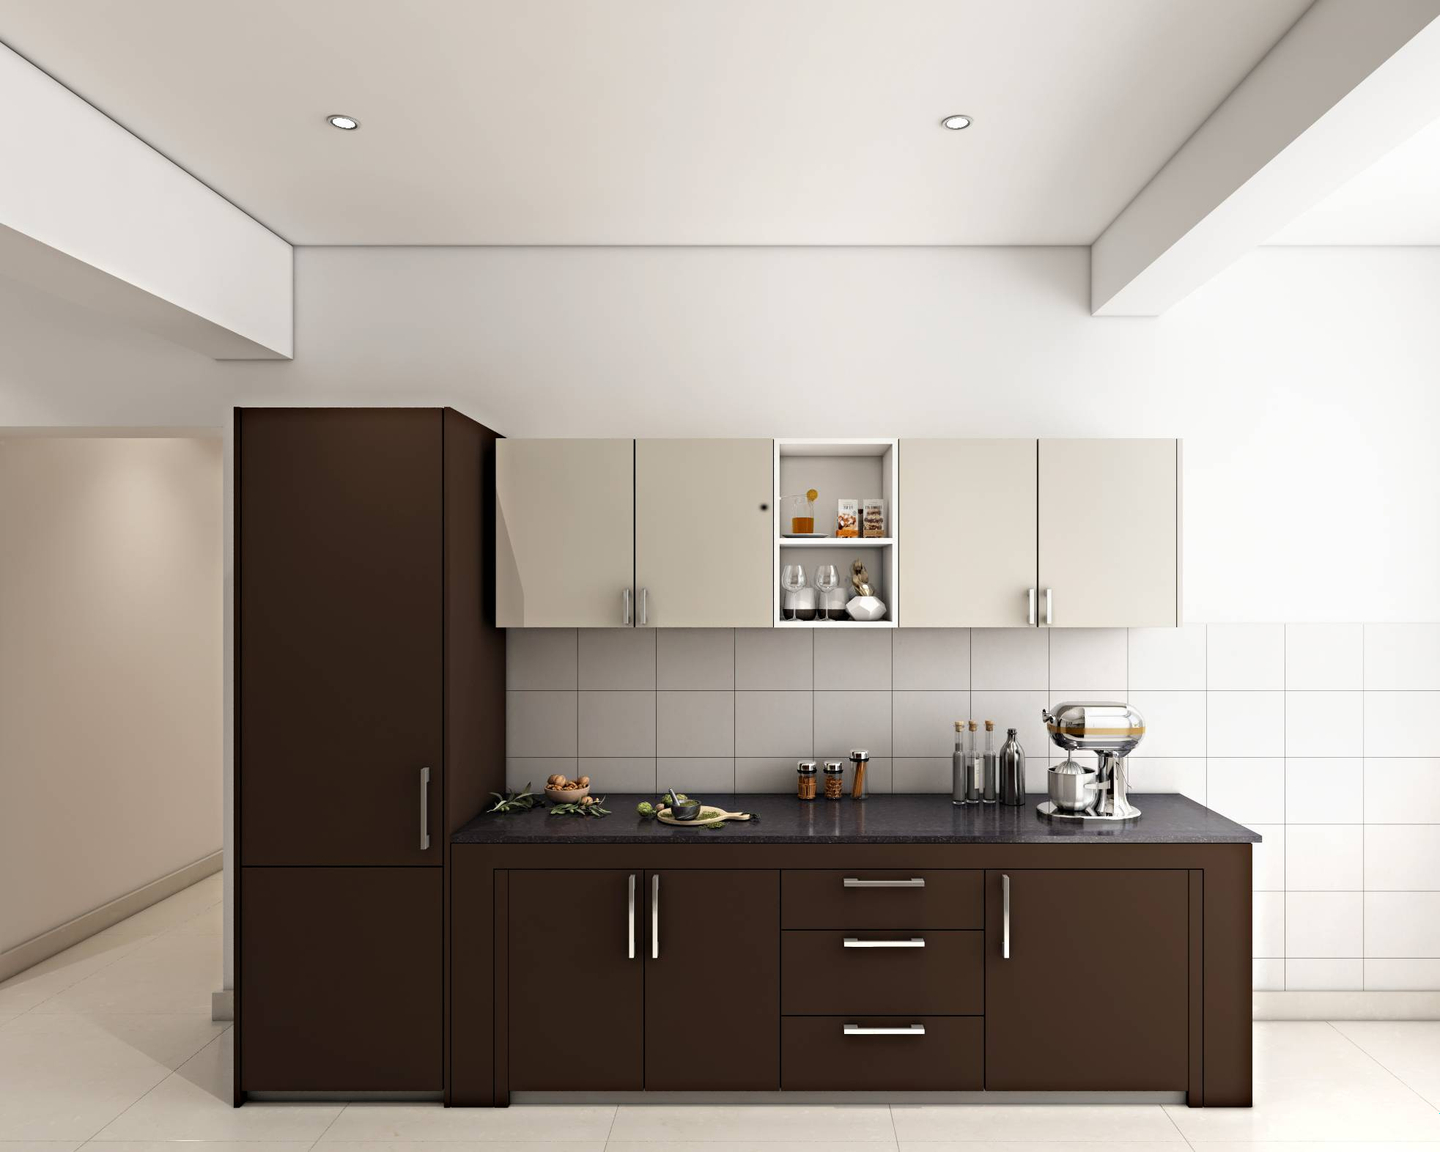 Contemporary Parallel Kitchen Design With White Wall Cabinets